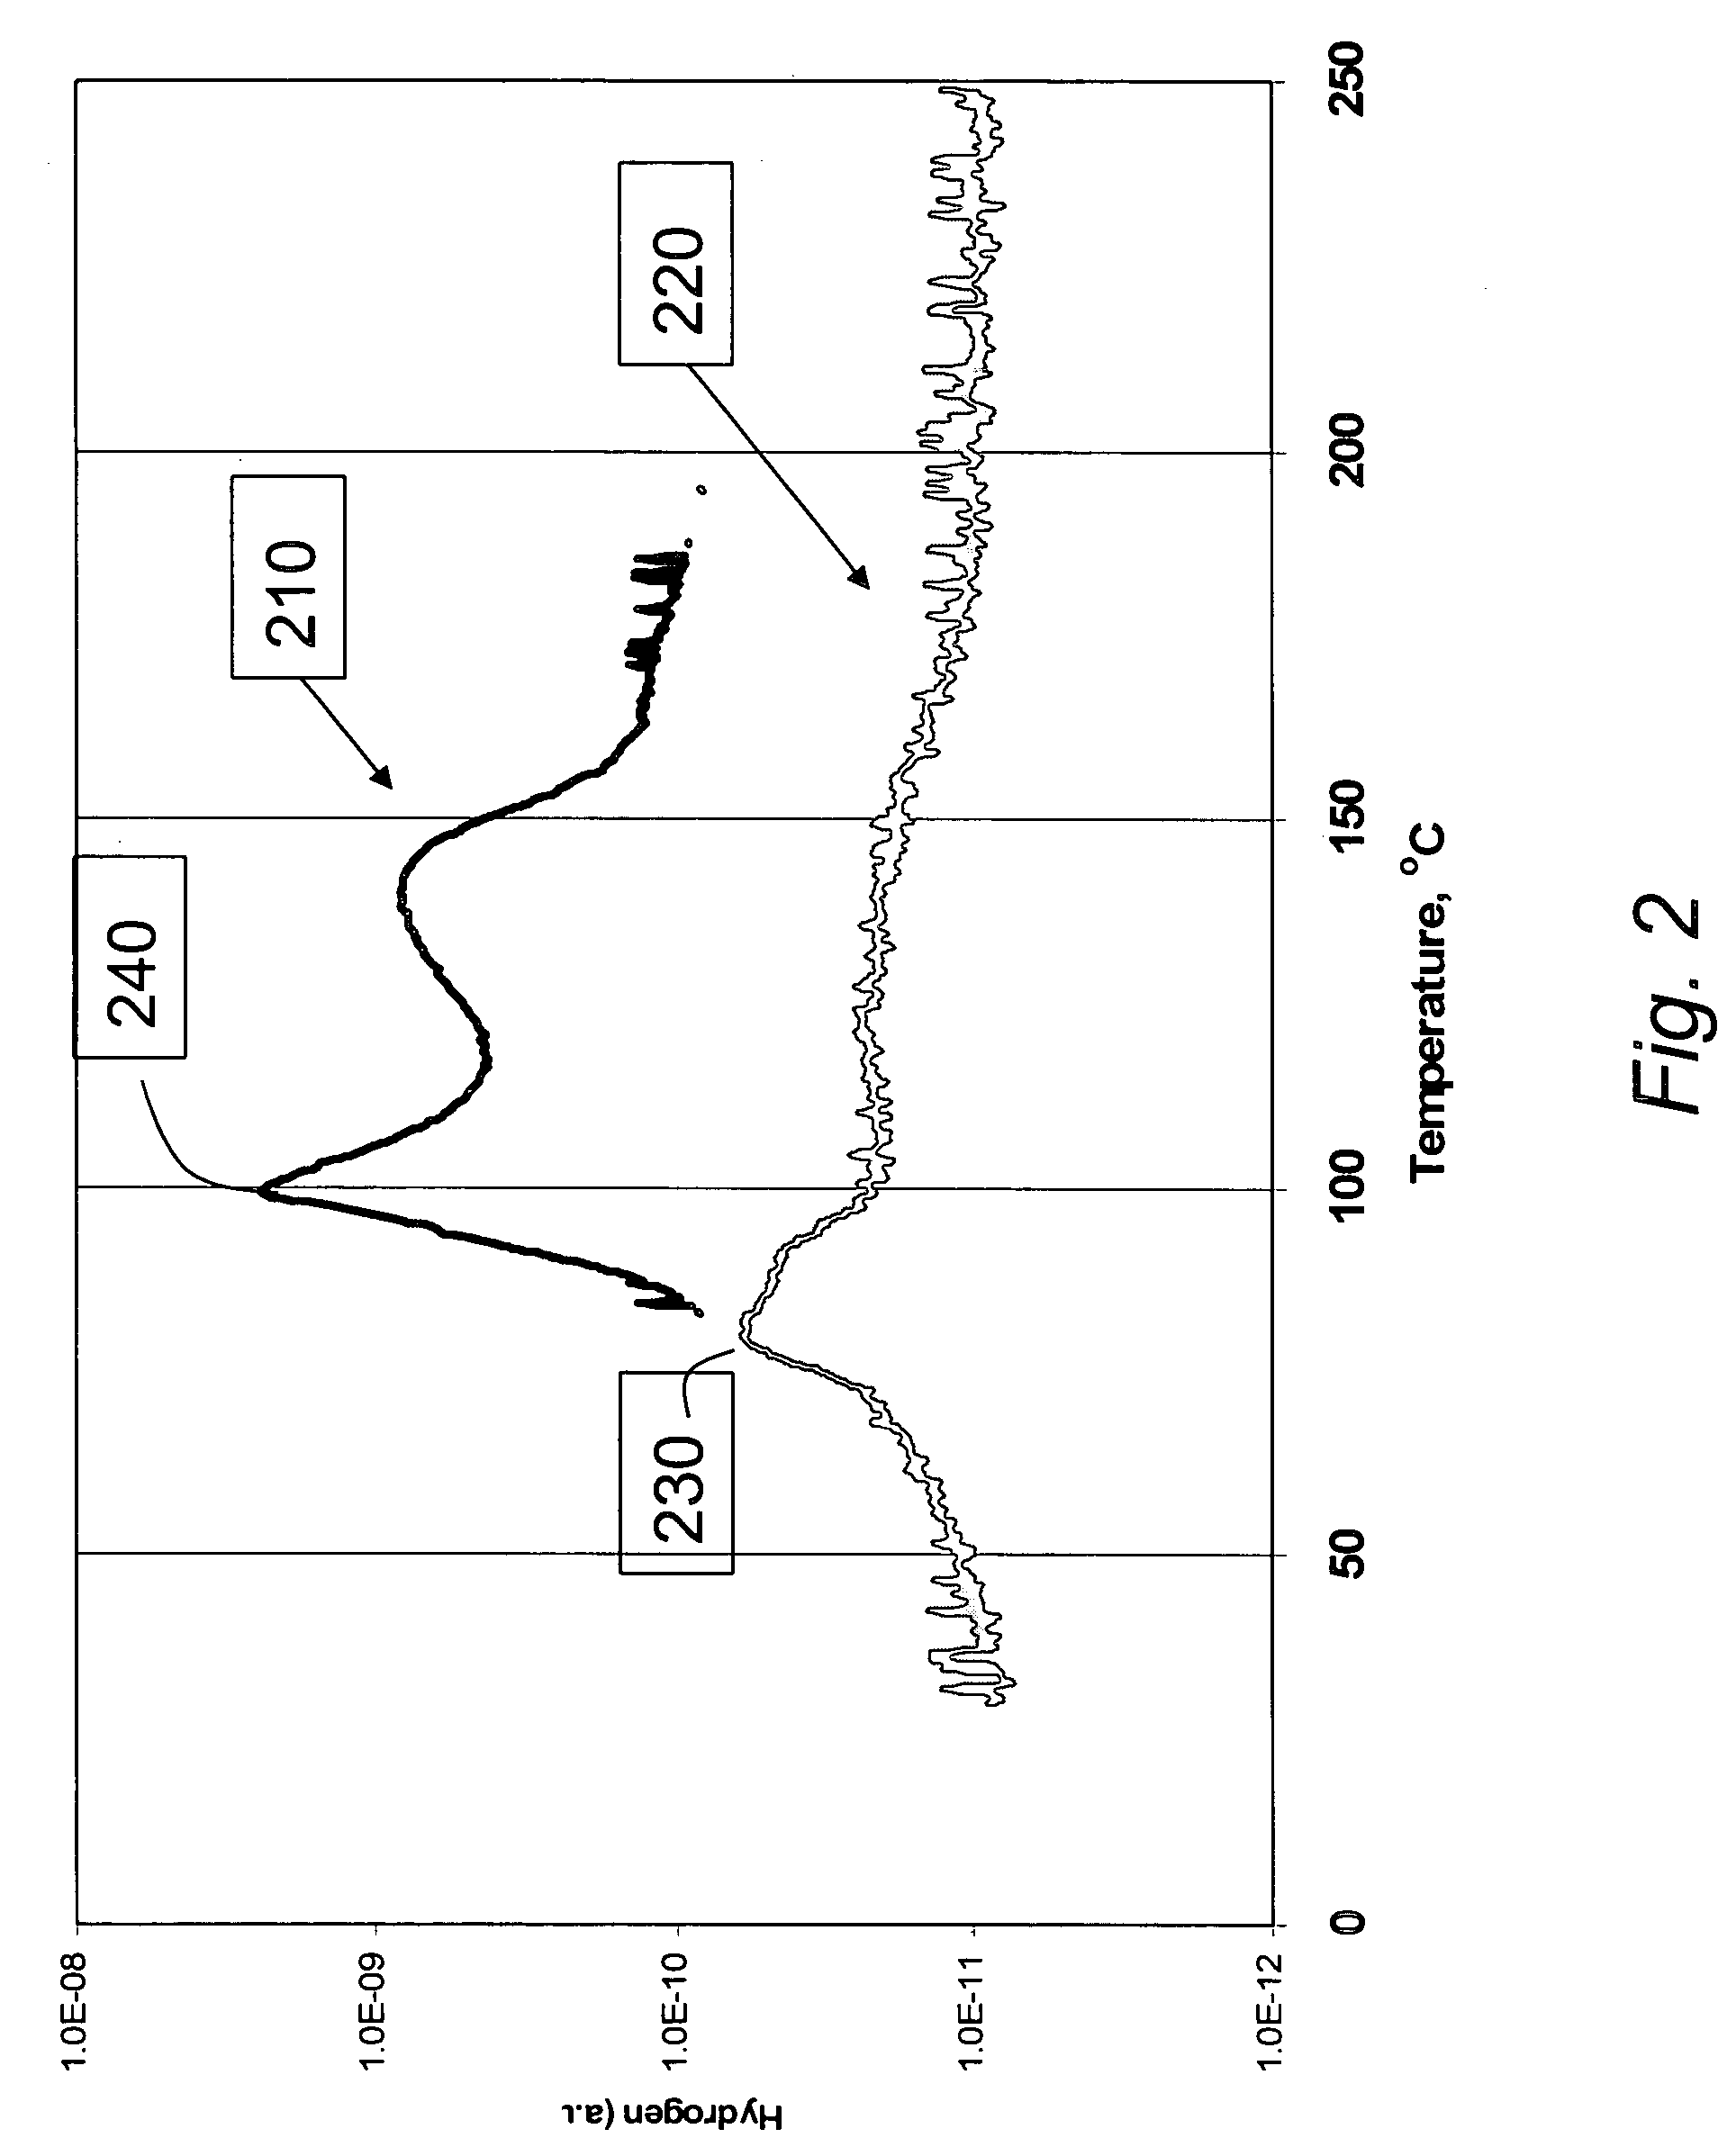 Materials for storage and release of hydrogen and methods for preparing and using same